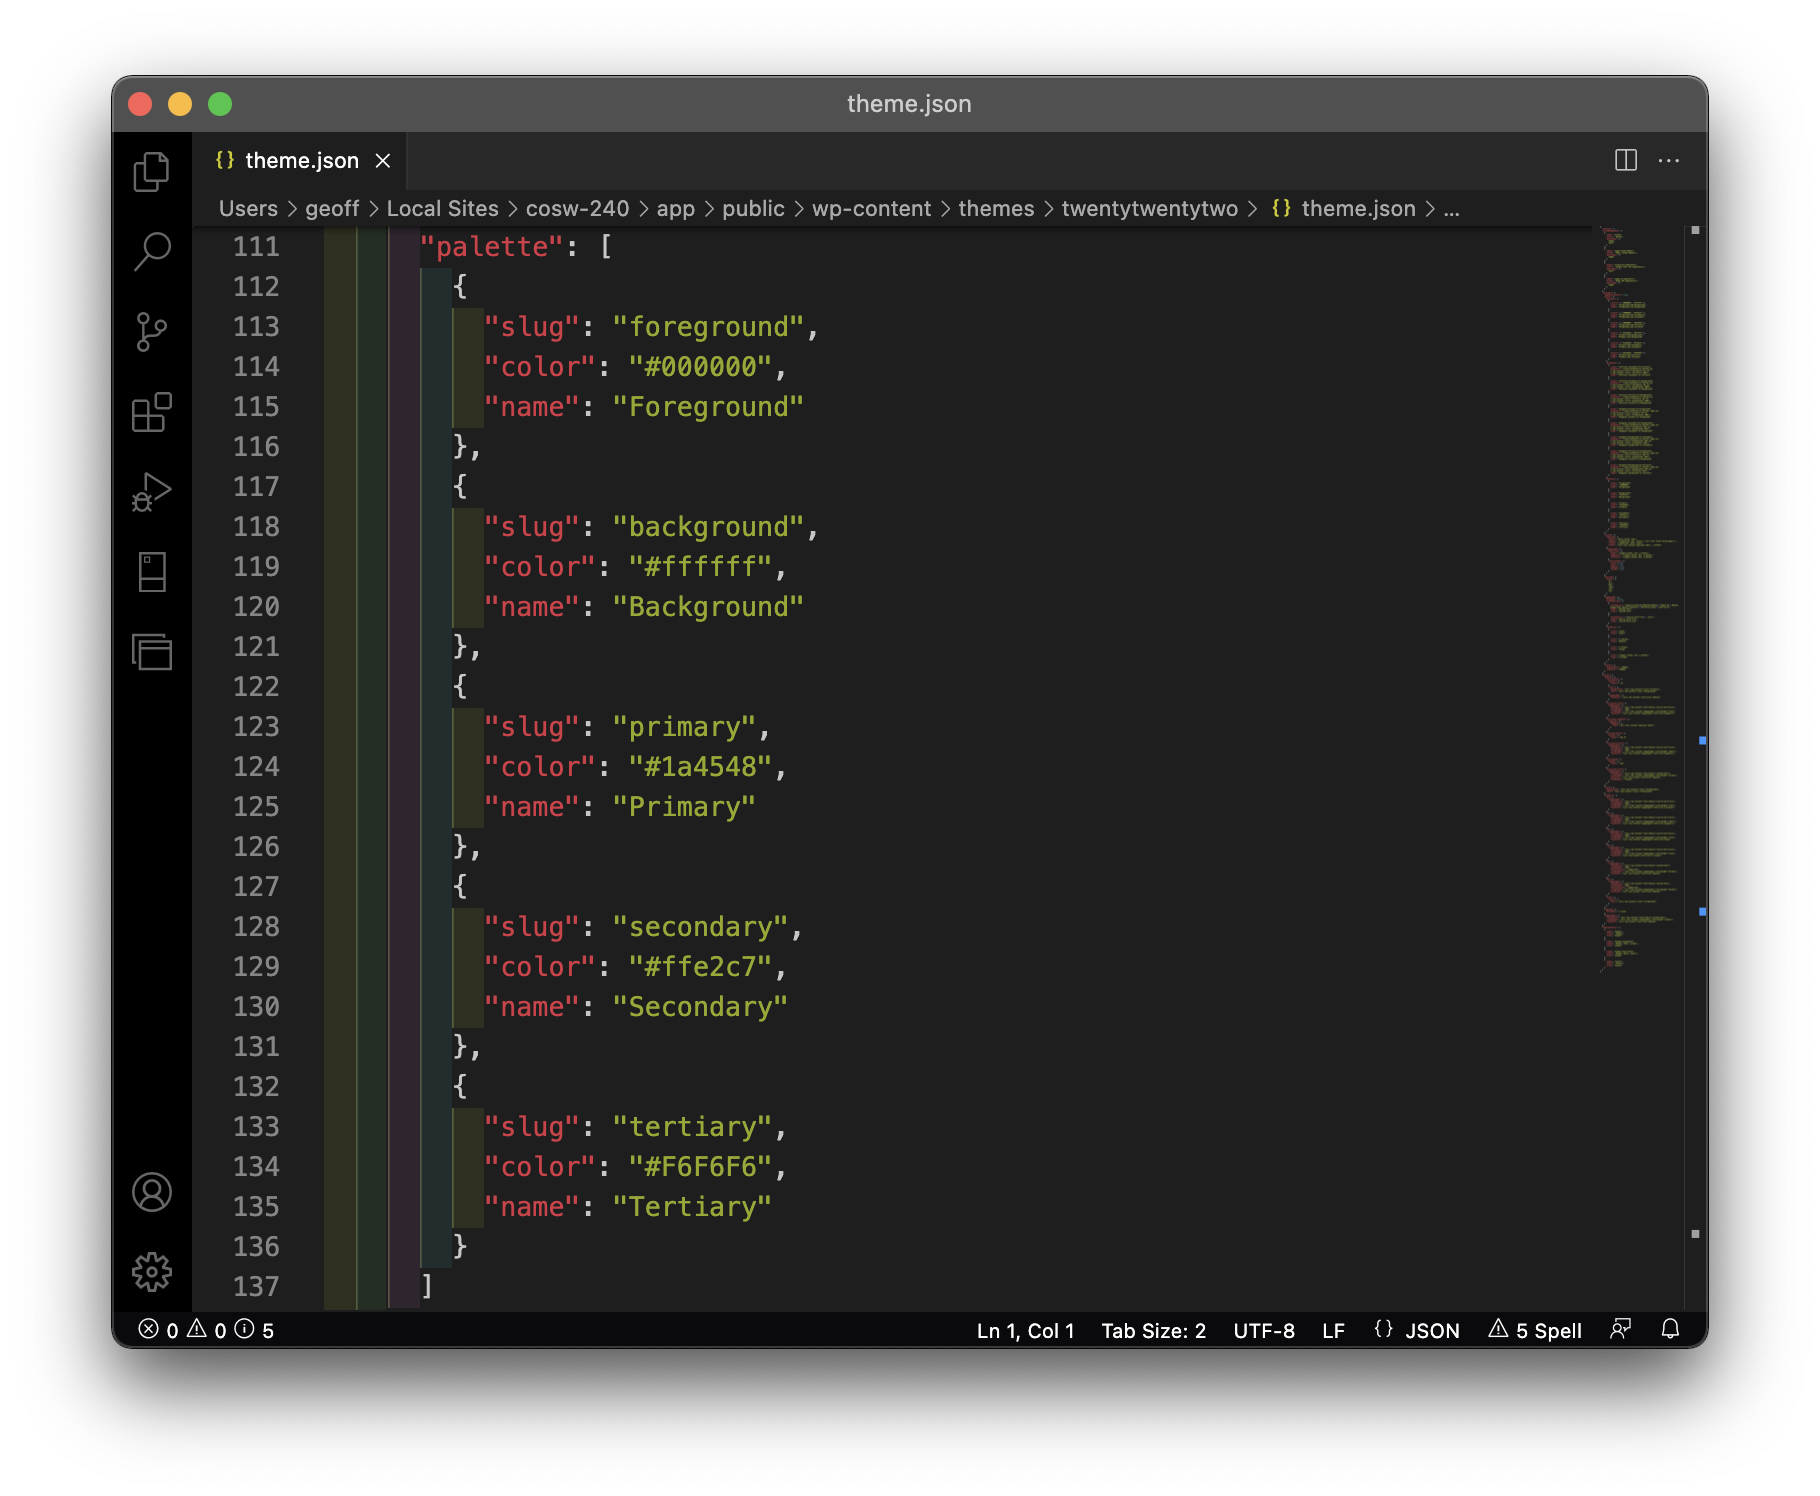 Screenshot of the theme.json file open in a code editor.